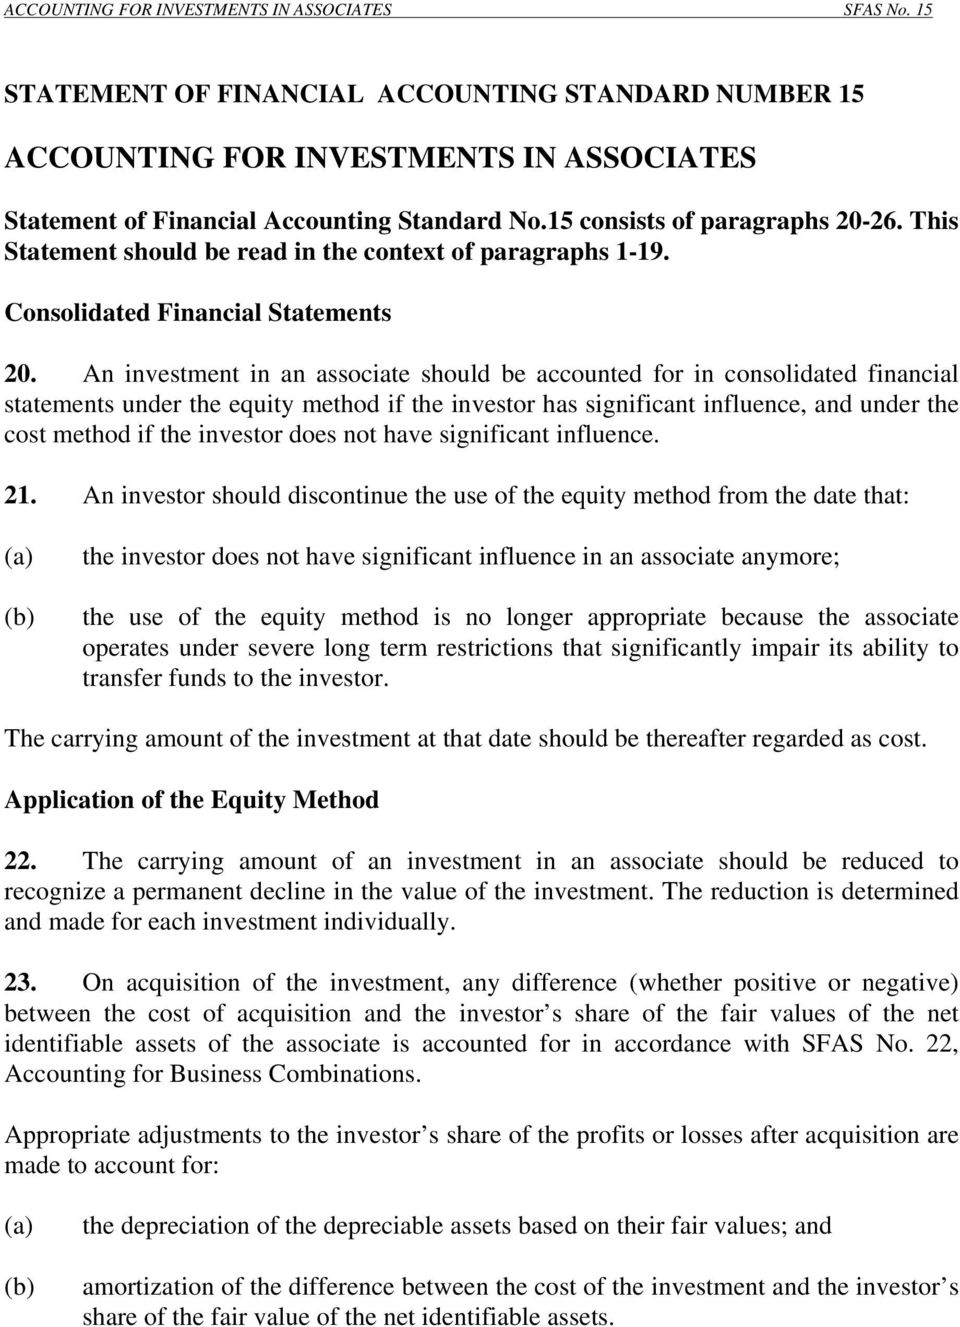 An investment in an associate should be accounted for in consolidated financial statements under the equity method if the investor has significant influence, and under the cost method if the investor